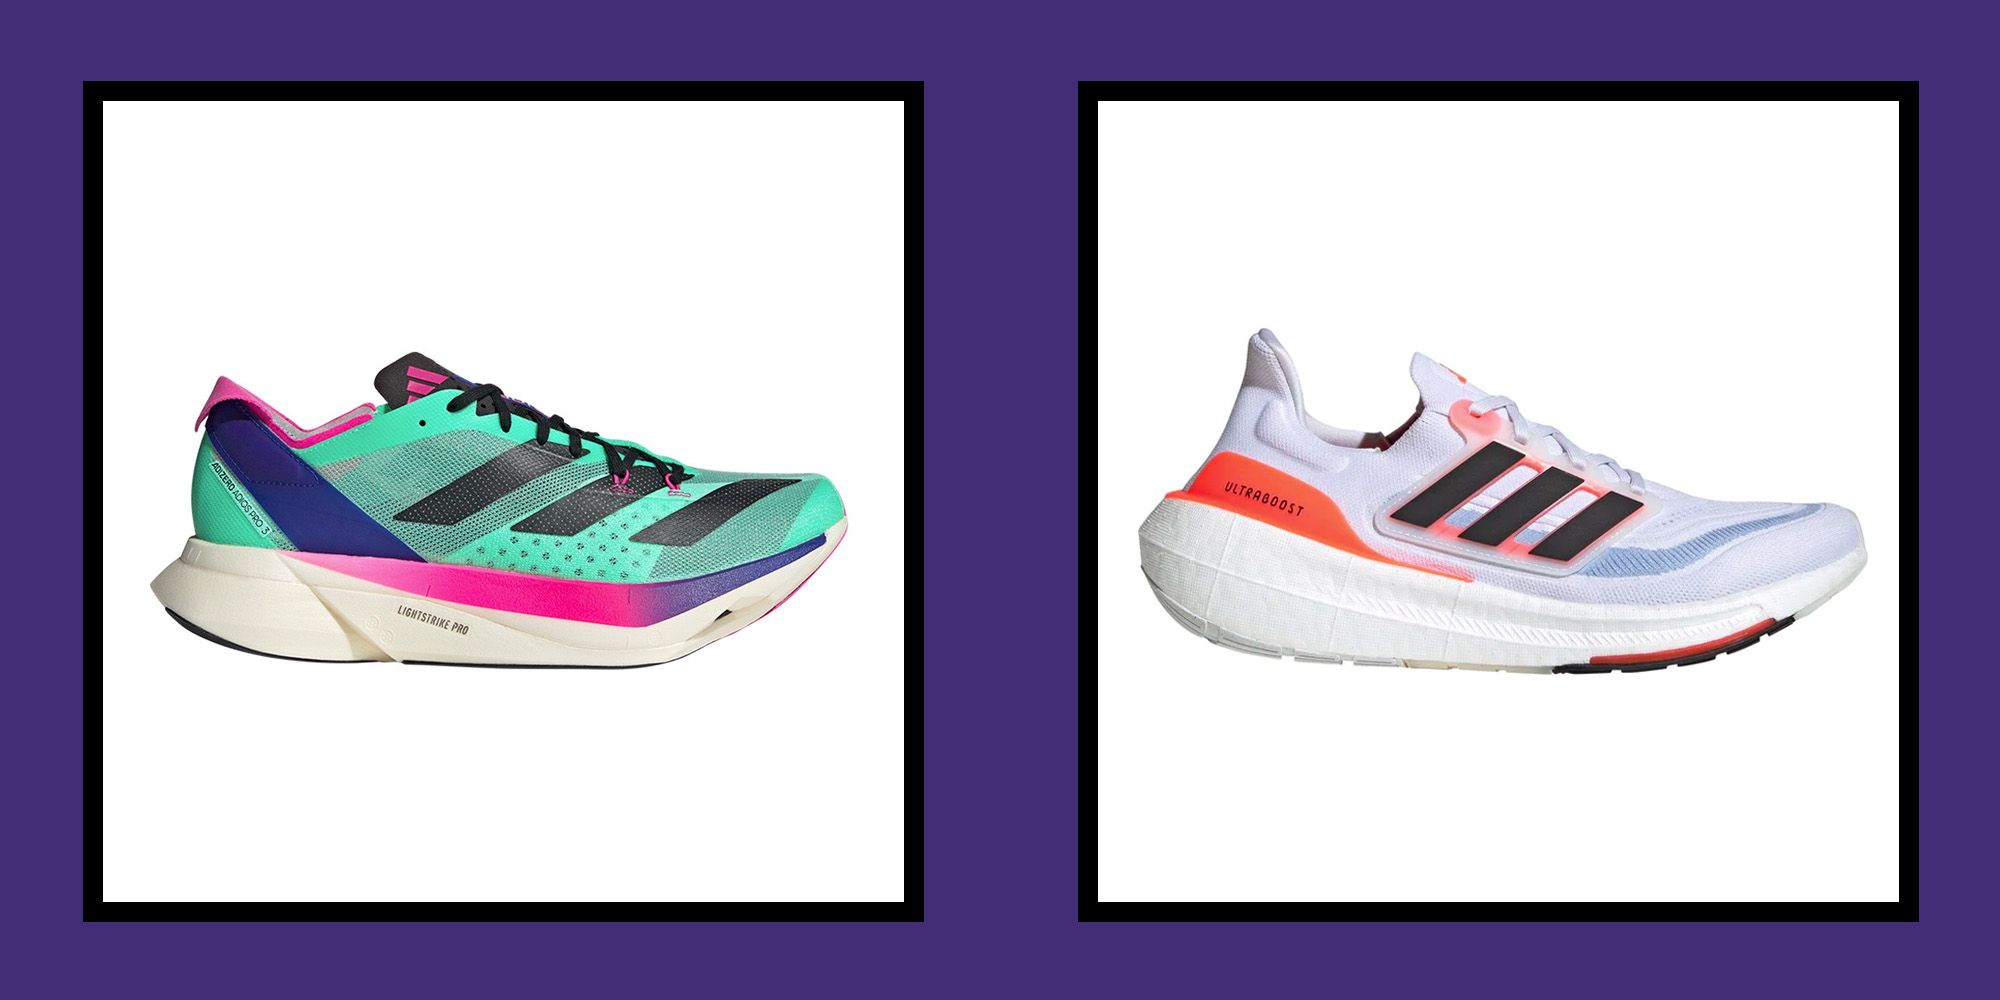 16 Best Adidas Shoes to Buy in 2023, According to Style Experts